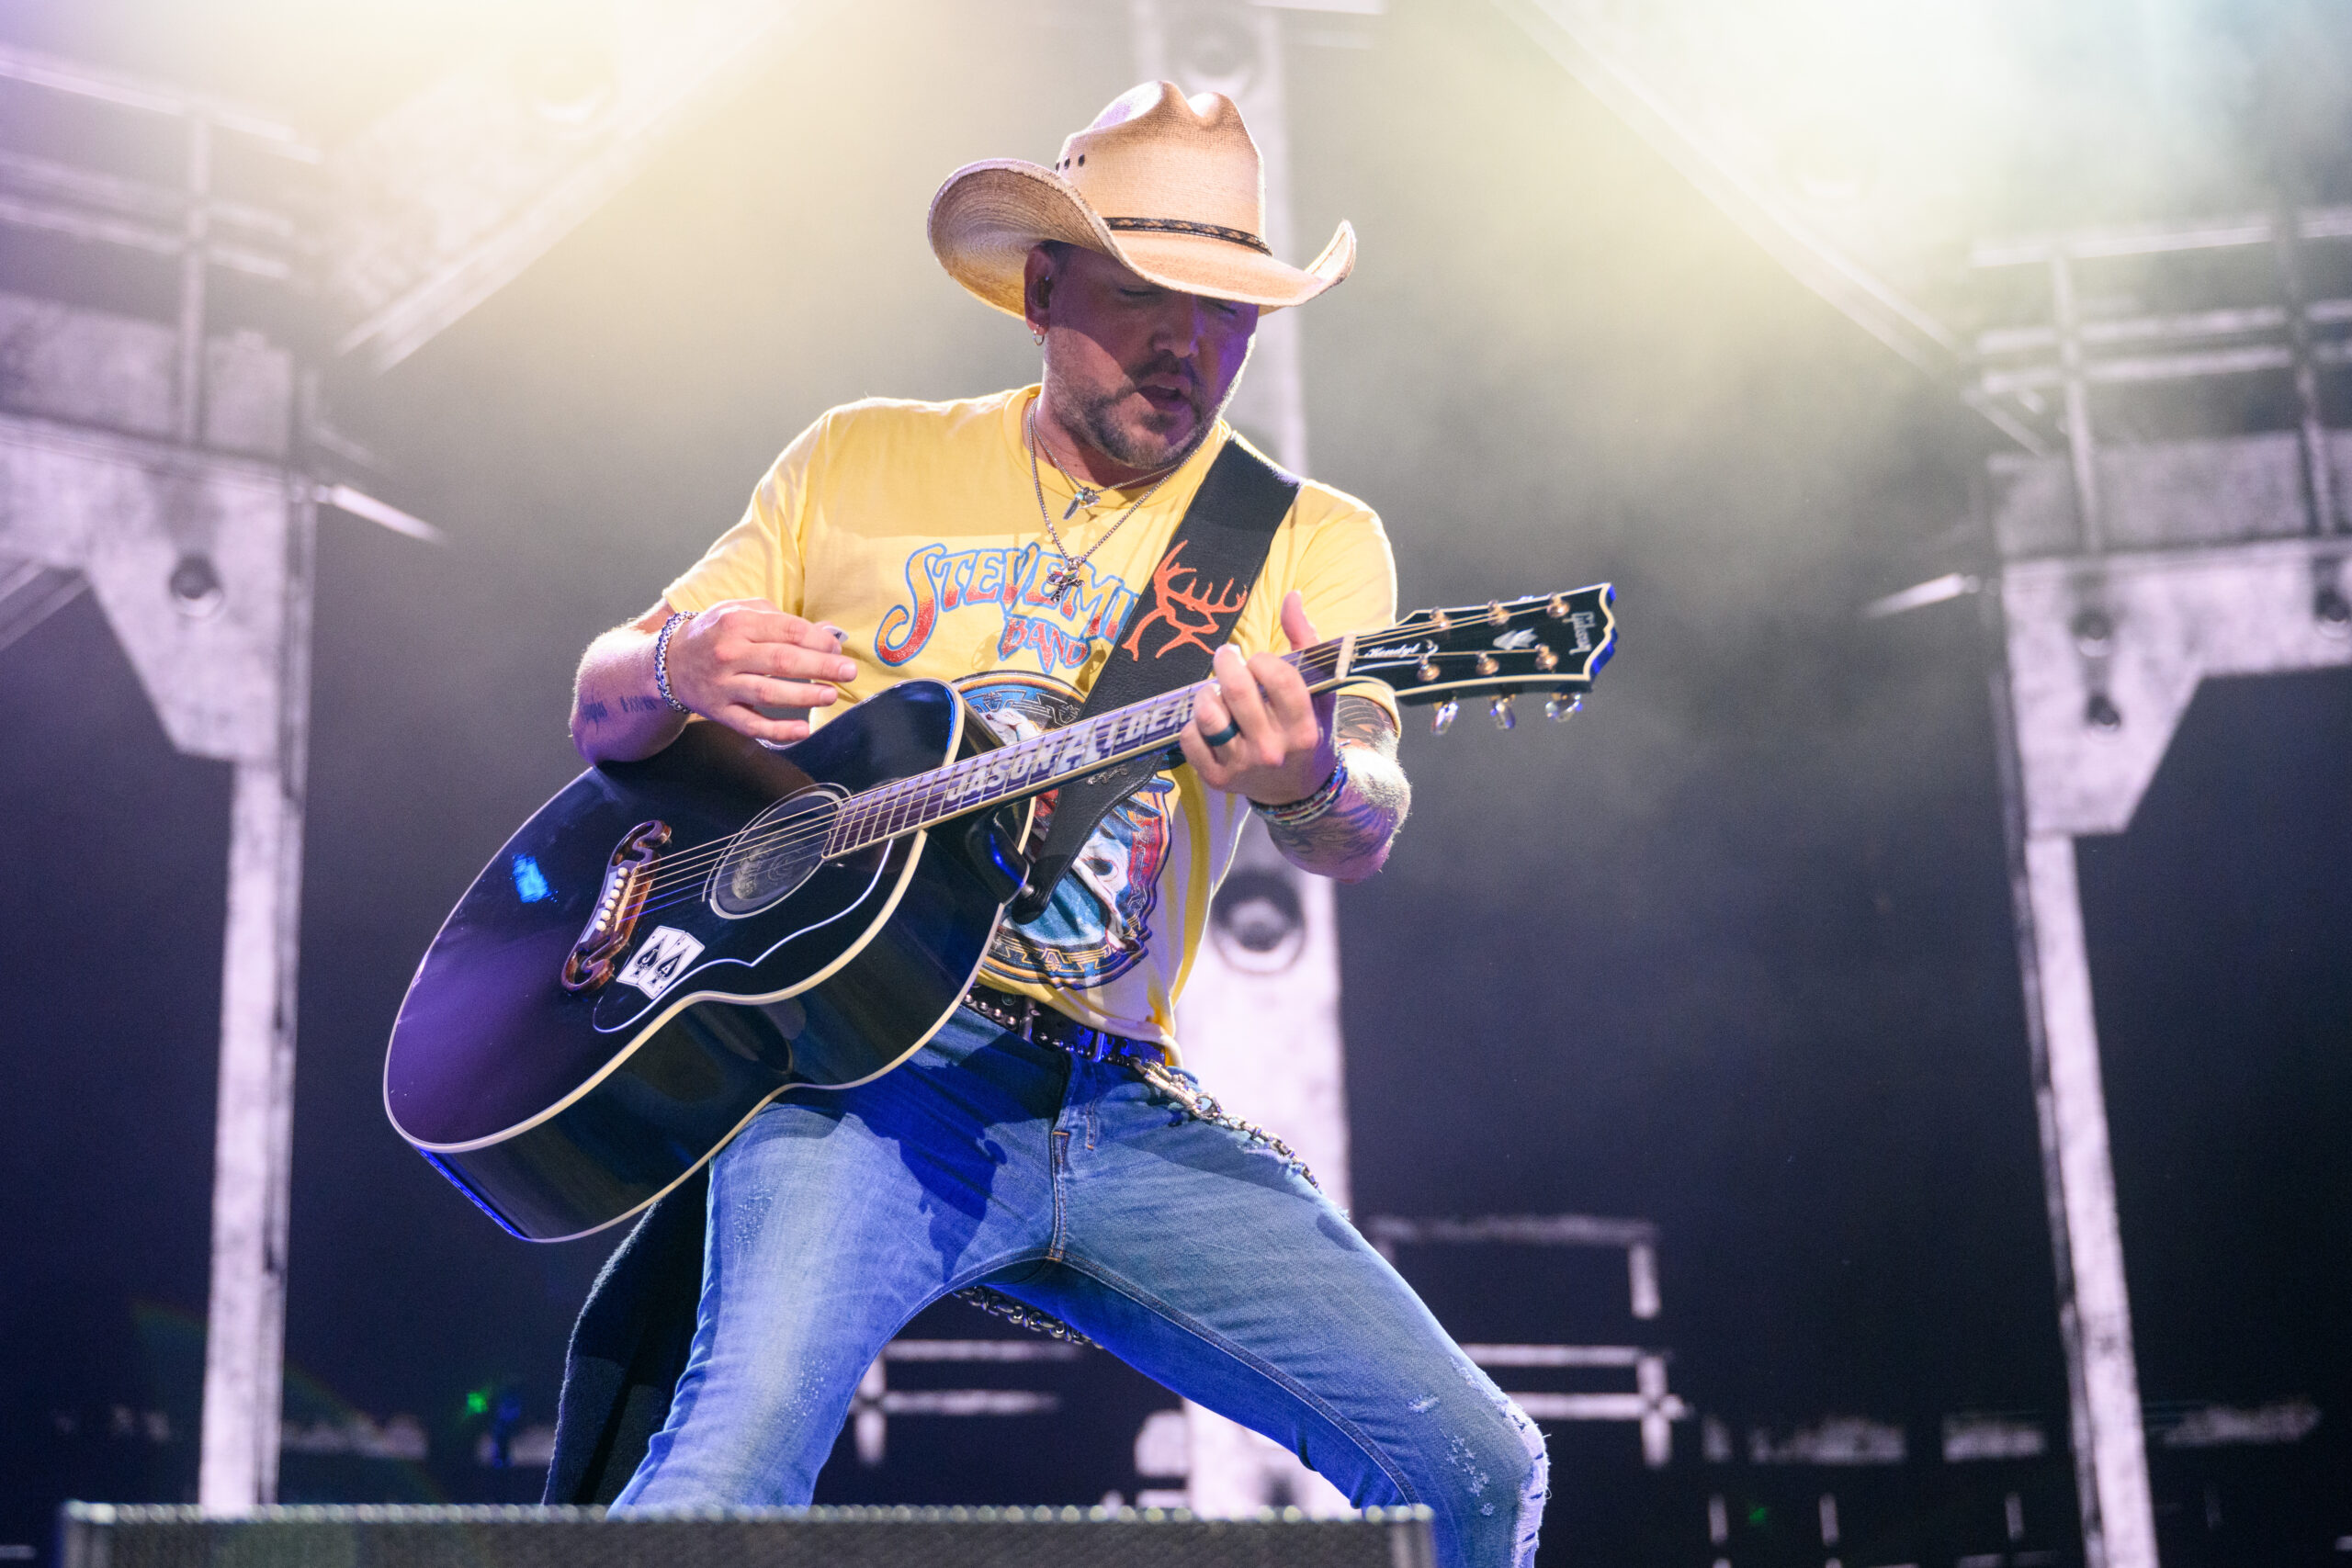 Last Chance to Win Tickets to See Jason Aldean Bank of NH Pavilion